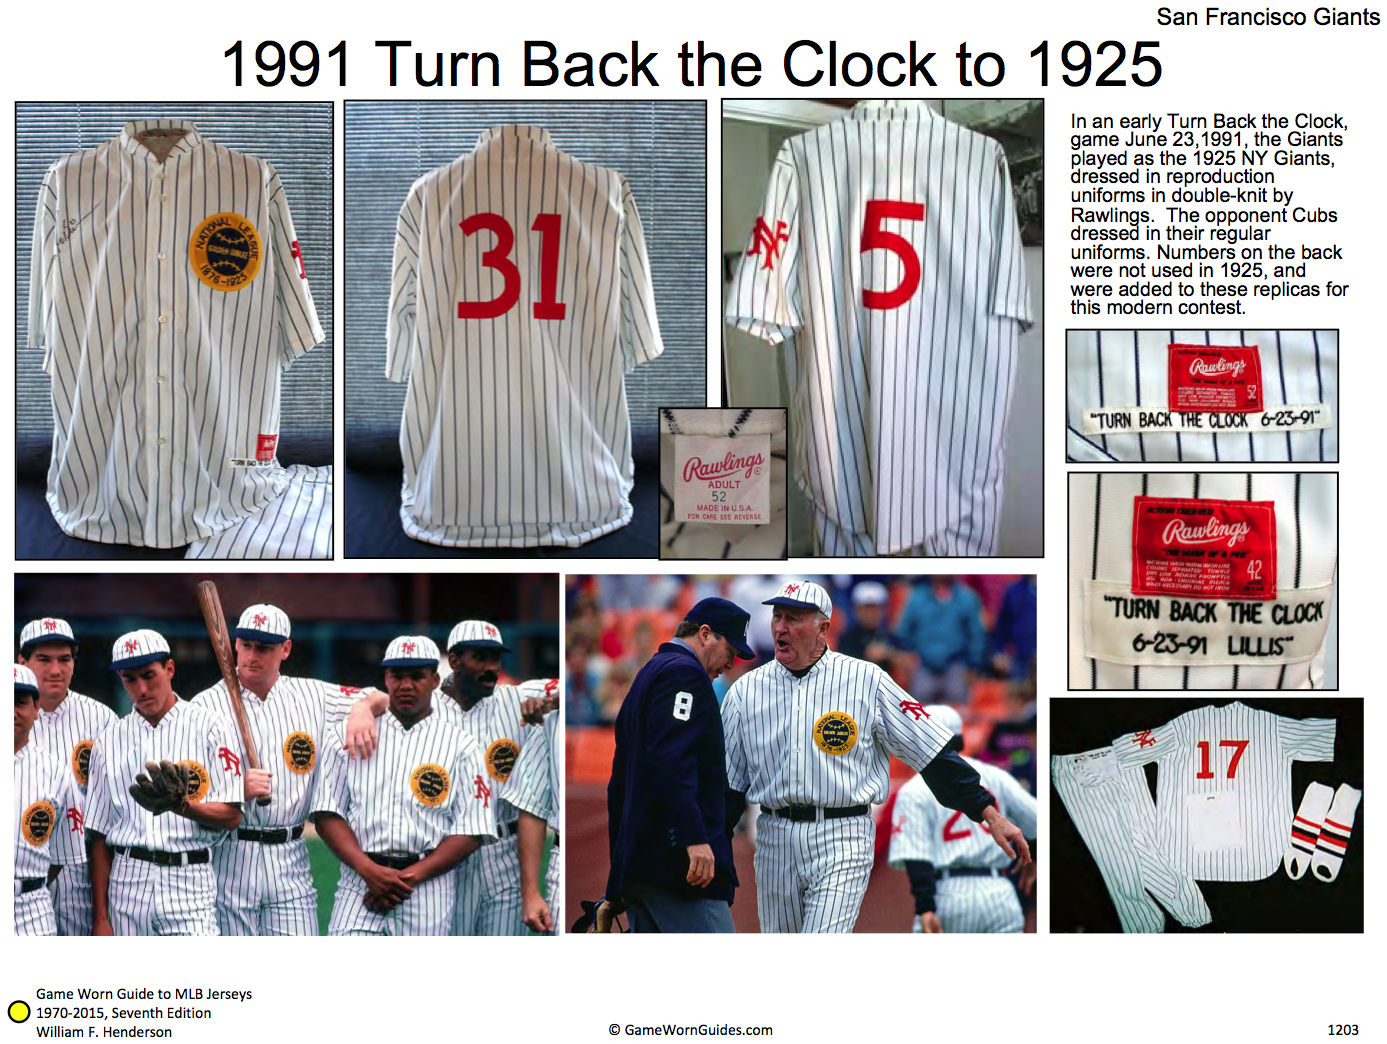 25 years ago, White Sox rolled out MLB's first throwback uniforms